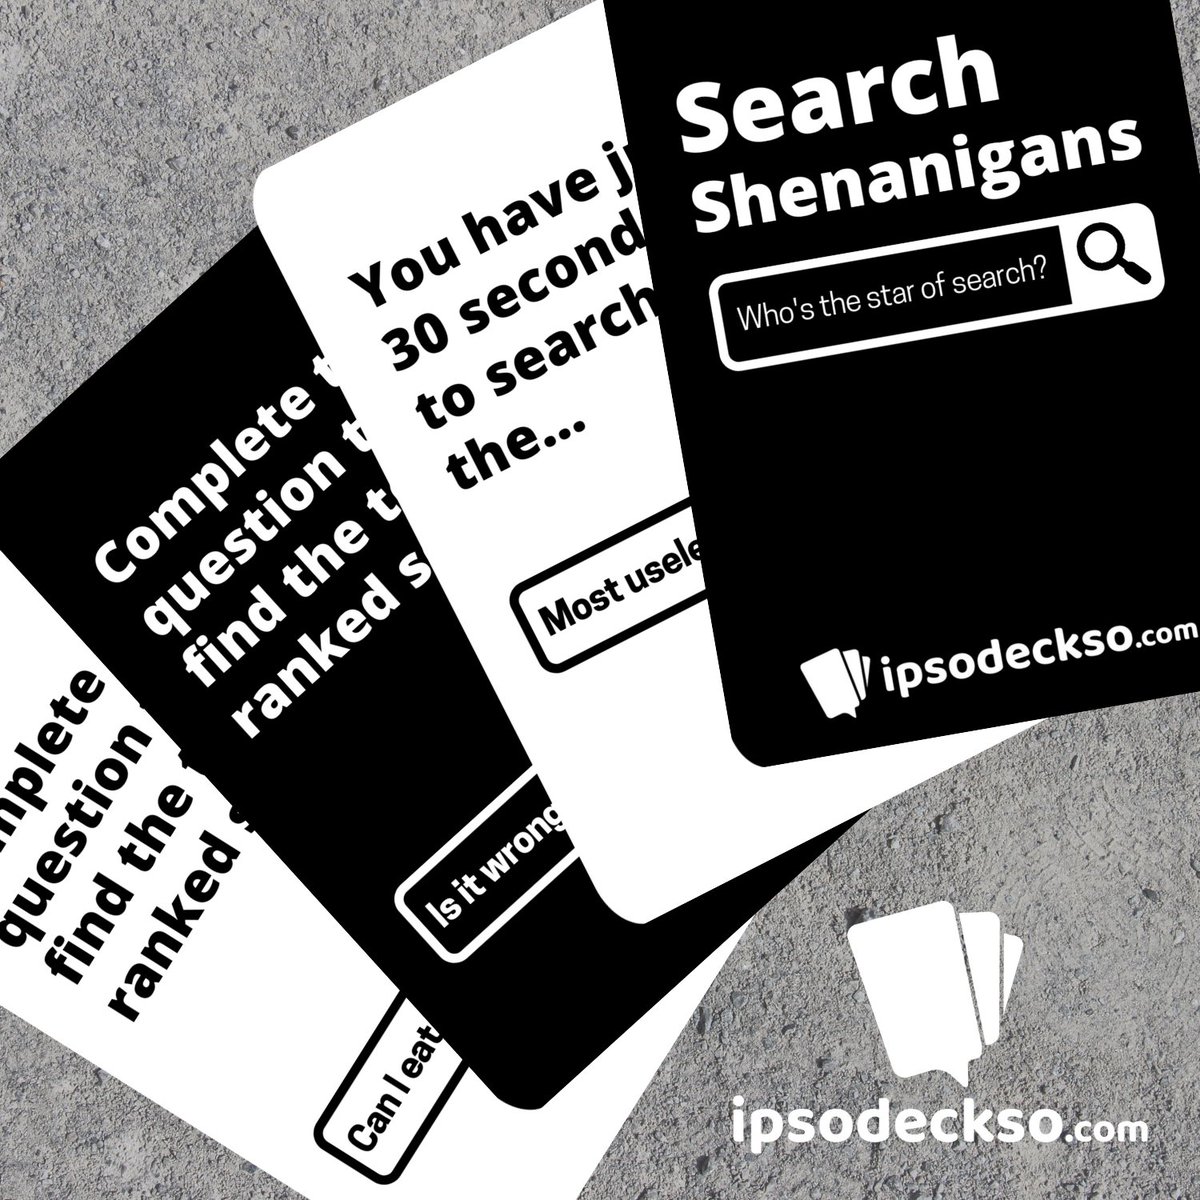 Meetings rule 1- SWITCH OFF YOUR PHONE 📵

Hmm.. let's put a pin in that.

In our new digital card game
‘Search Shenanigans’ we want you to SWITCH YOUR PHONES ON

With 140 search engine challenges, this fun, social deck is ideal for #virtualgroups

Do enjoy your rule breaking!